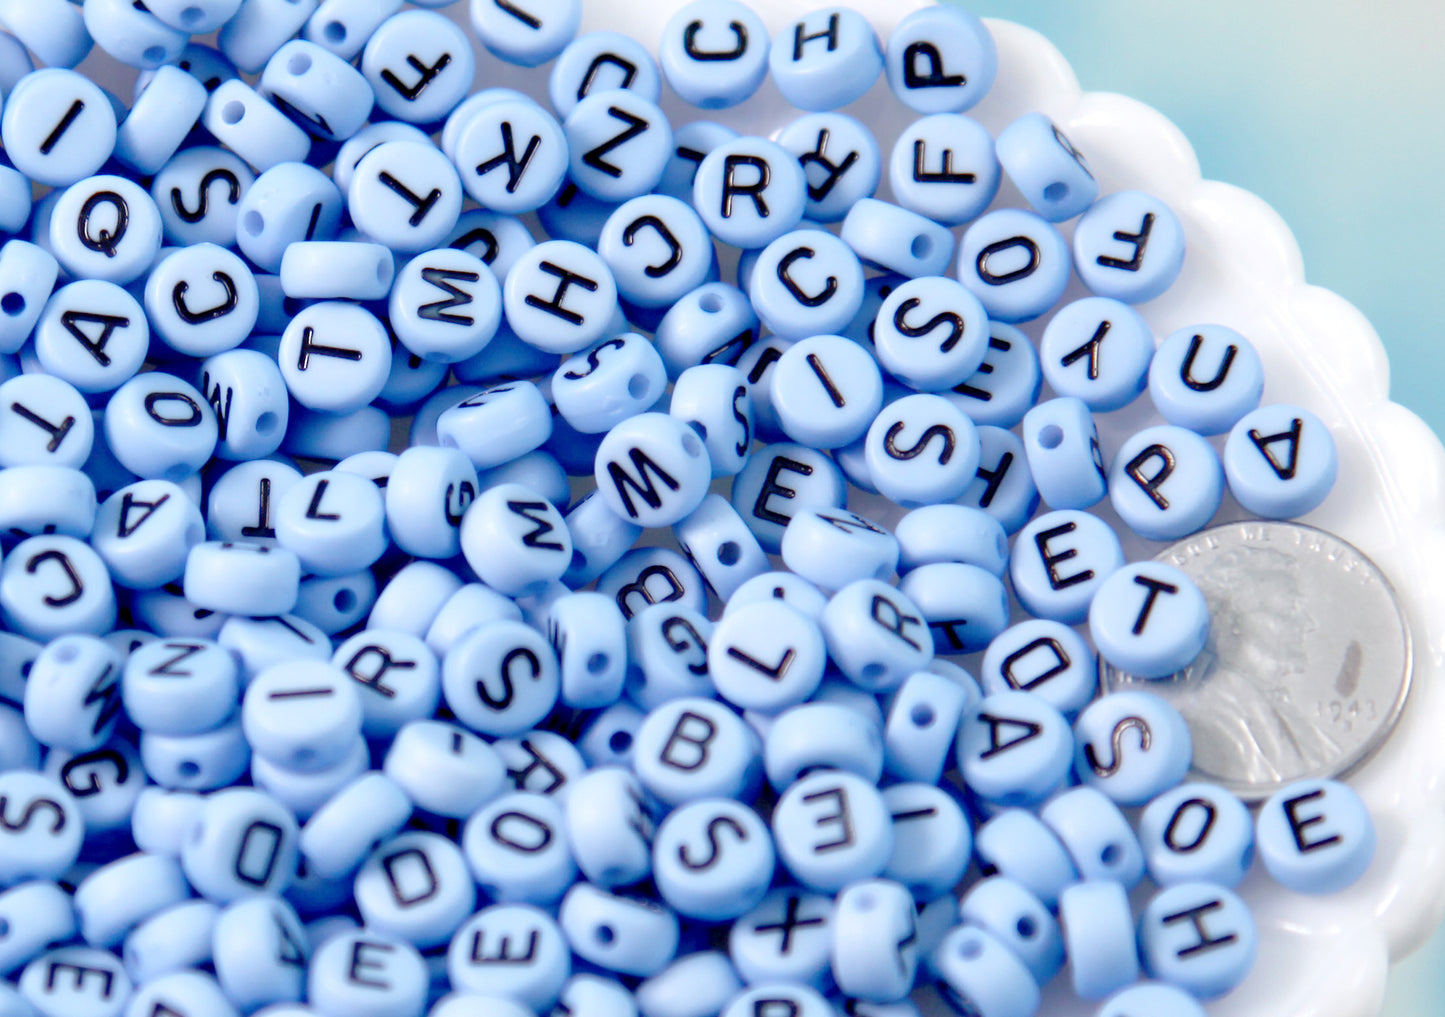 Letter Beads - 7mm Little Blue Round Alphabet Acrylic or Resin Beads - 400 pc set